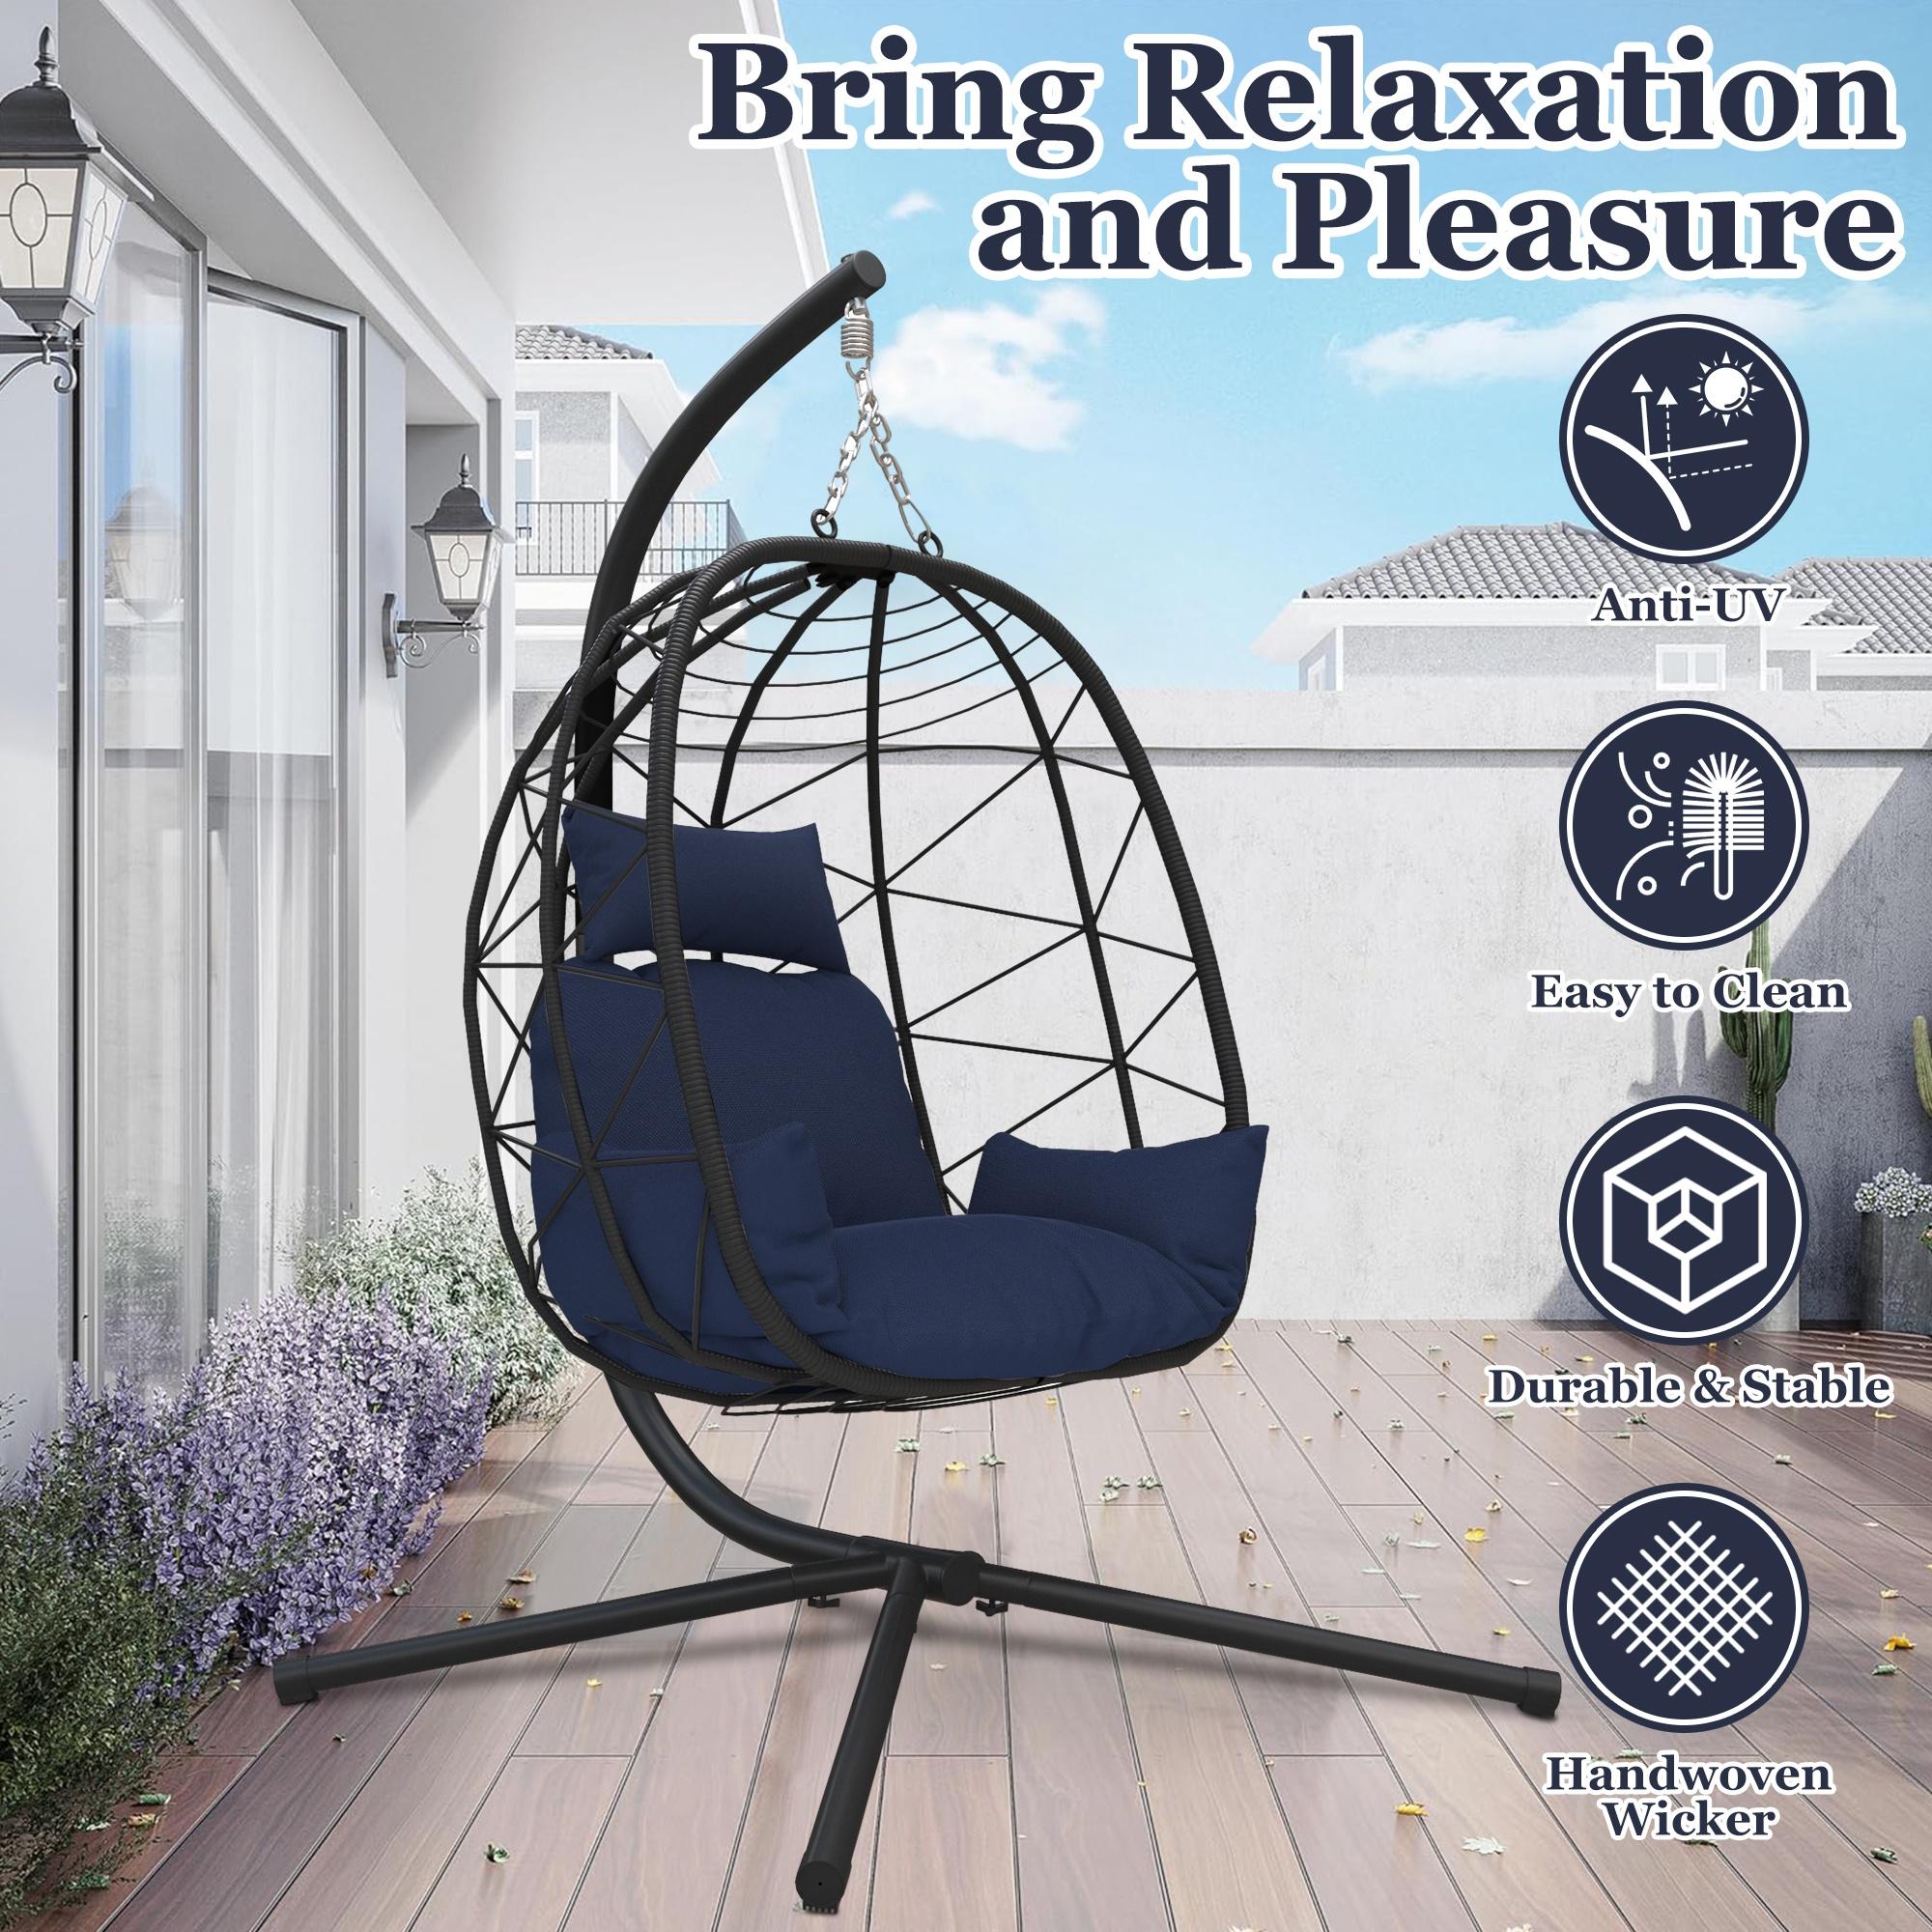 Egg Chair with Stand, Patio Wicker Hanging Chair, Egg Chair Hammock Chair with UV Resistant Cushion and Pillow for Indoor Outdoor, Patio Backyard Balcony Lounge Rattan Swing Chair, JA2832 - image 5 of 9